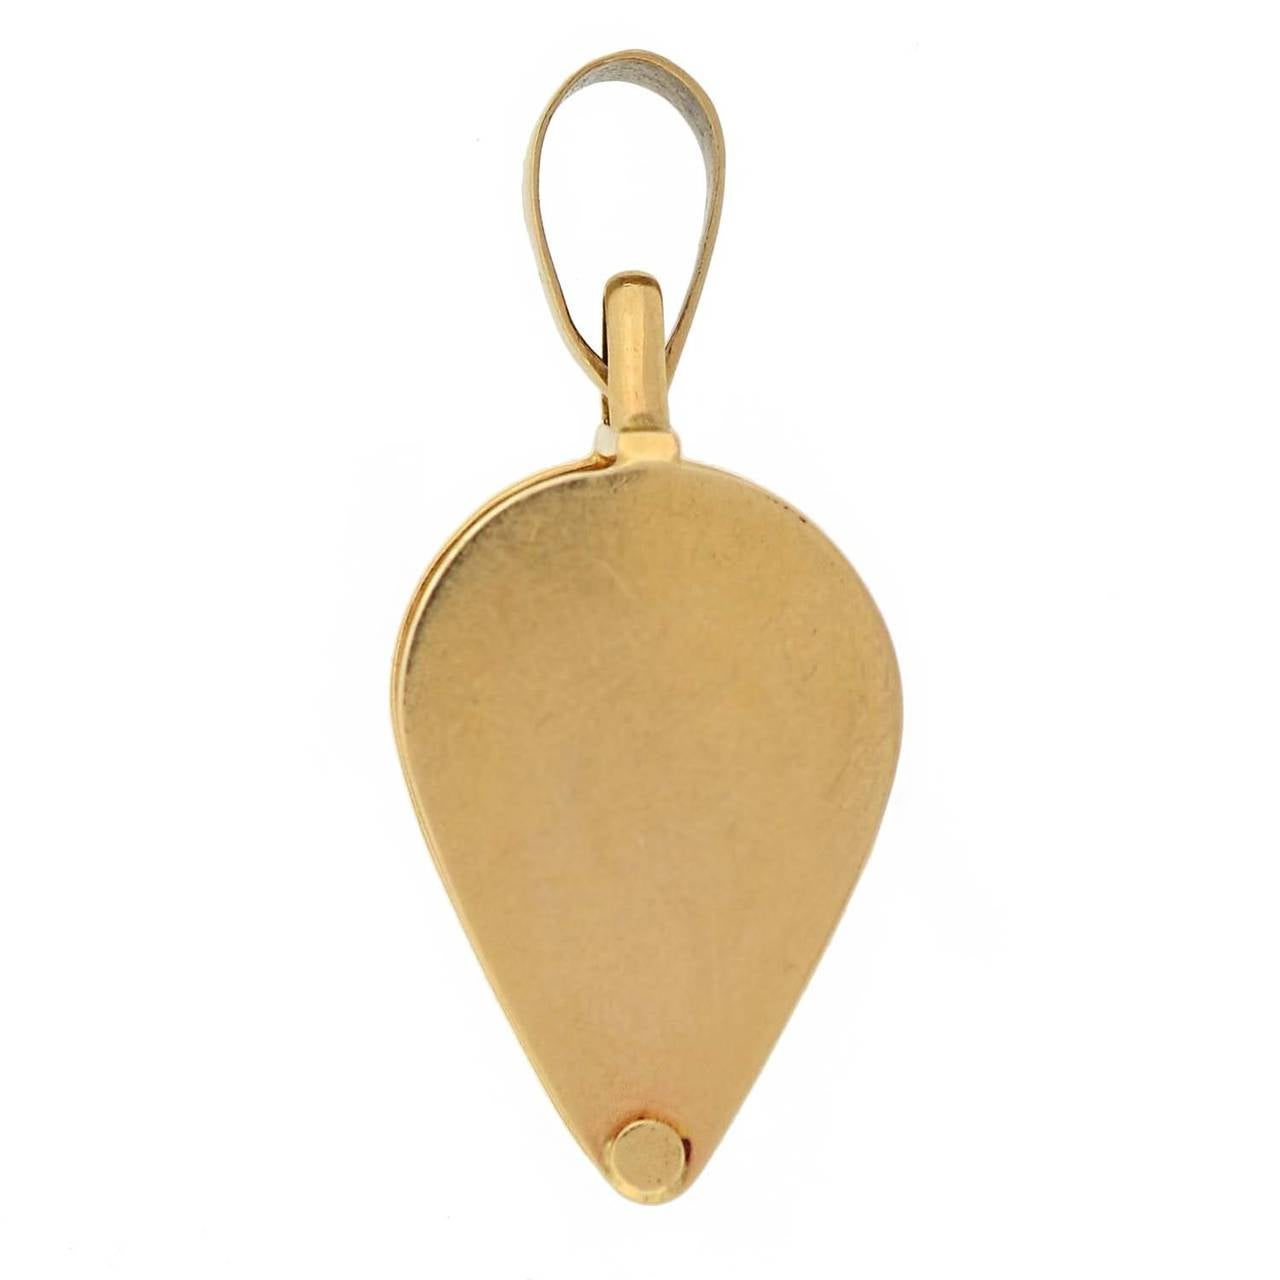 This solid 14kt gold jeweler's loop makes a fabulous pendant! All sides of the loop have a smooth, yellow gold surface and brightly polished finish. The lens is encased in yellow gold and has a 10x magnification when used, allowing the wearer to